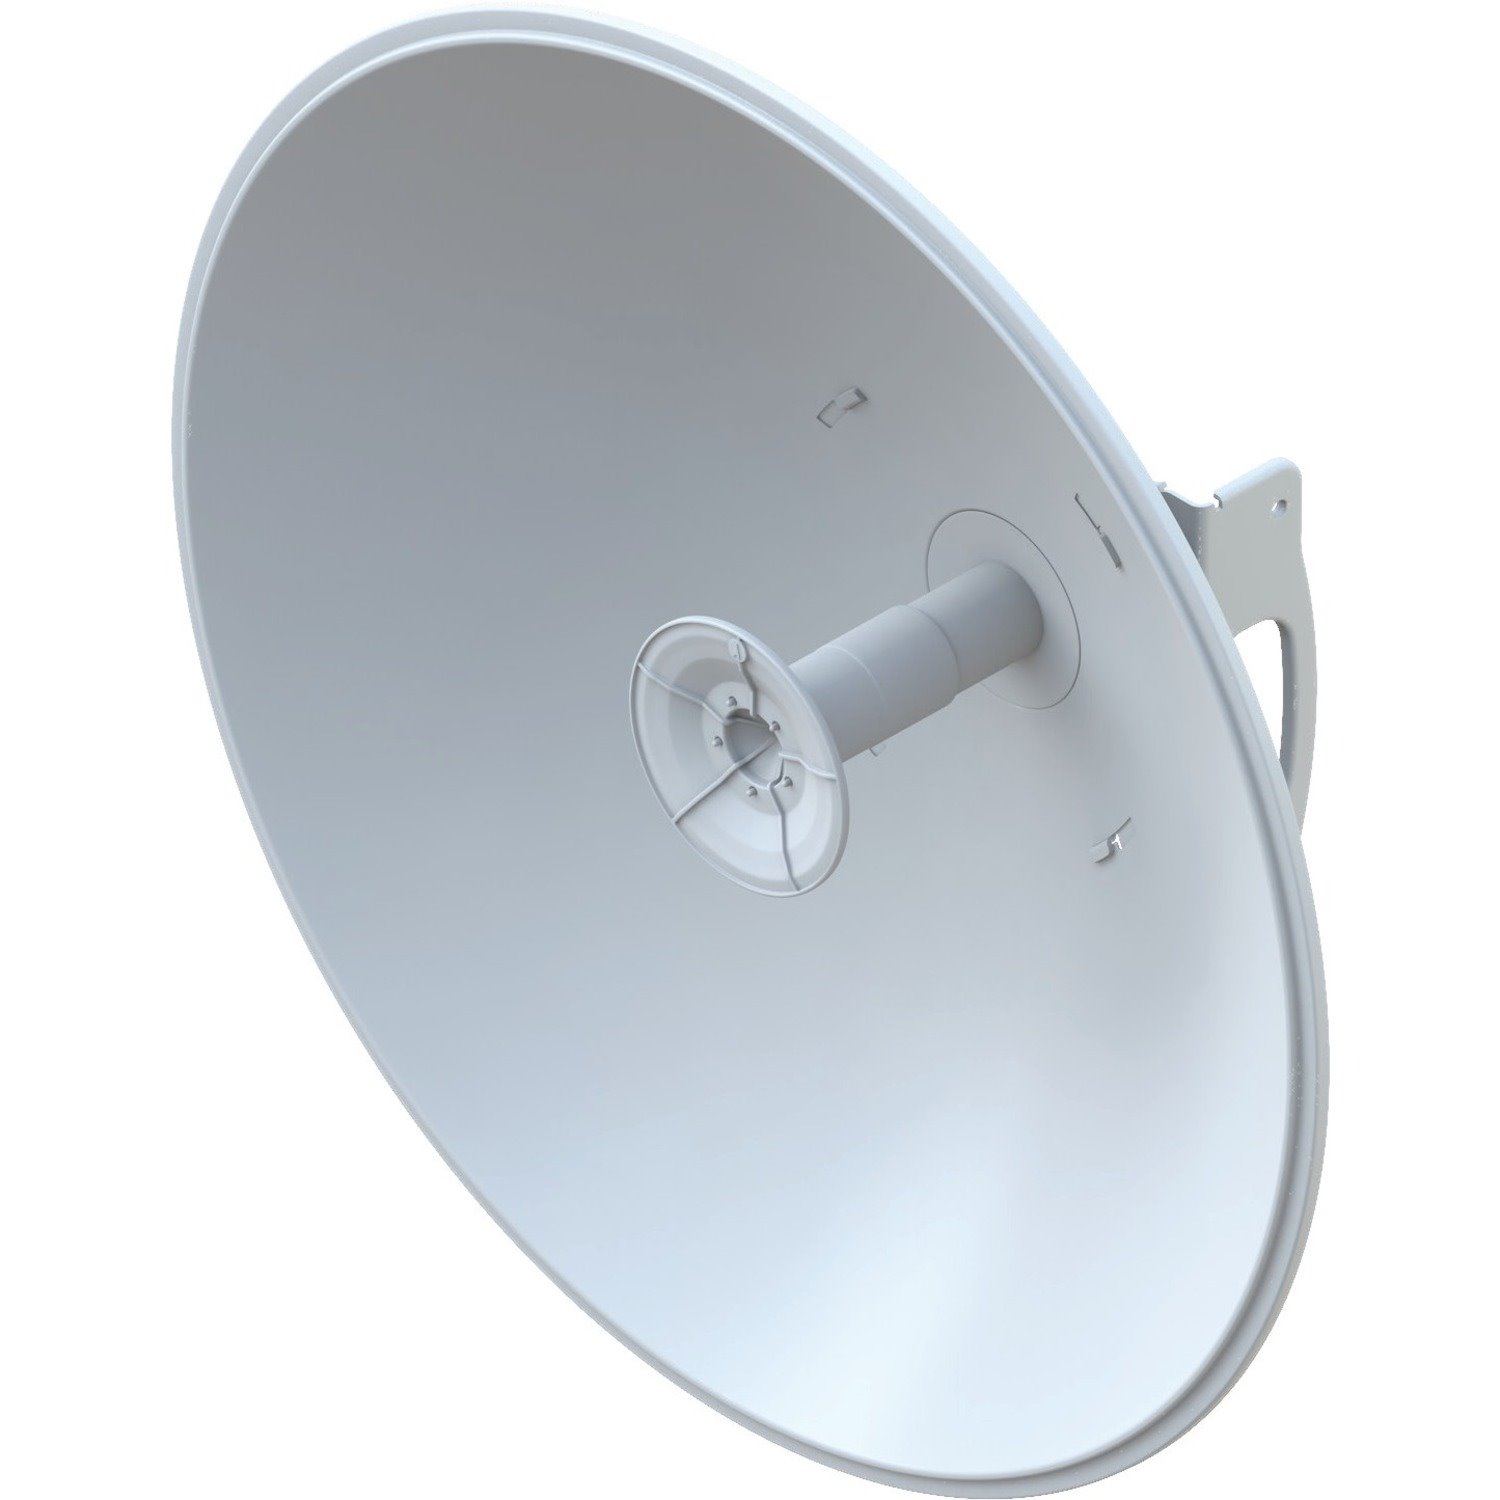 Ubiquiti AF-5G30-S45 Antenna for Wireless Data Network